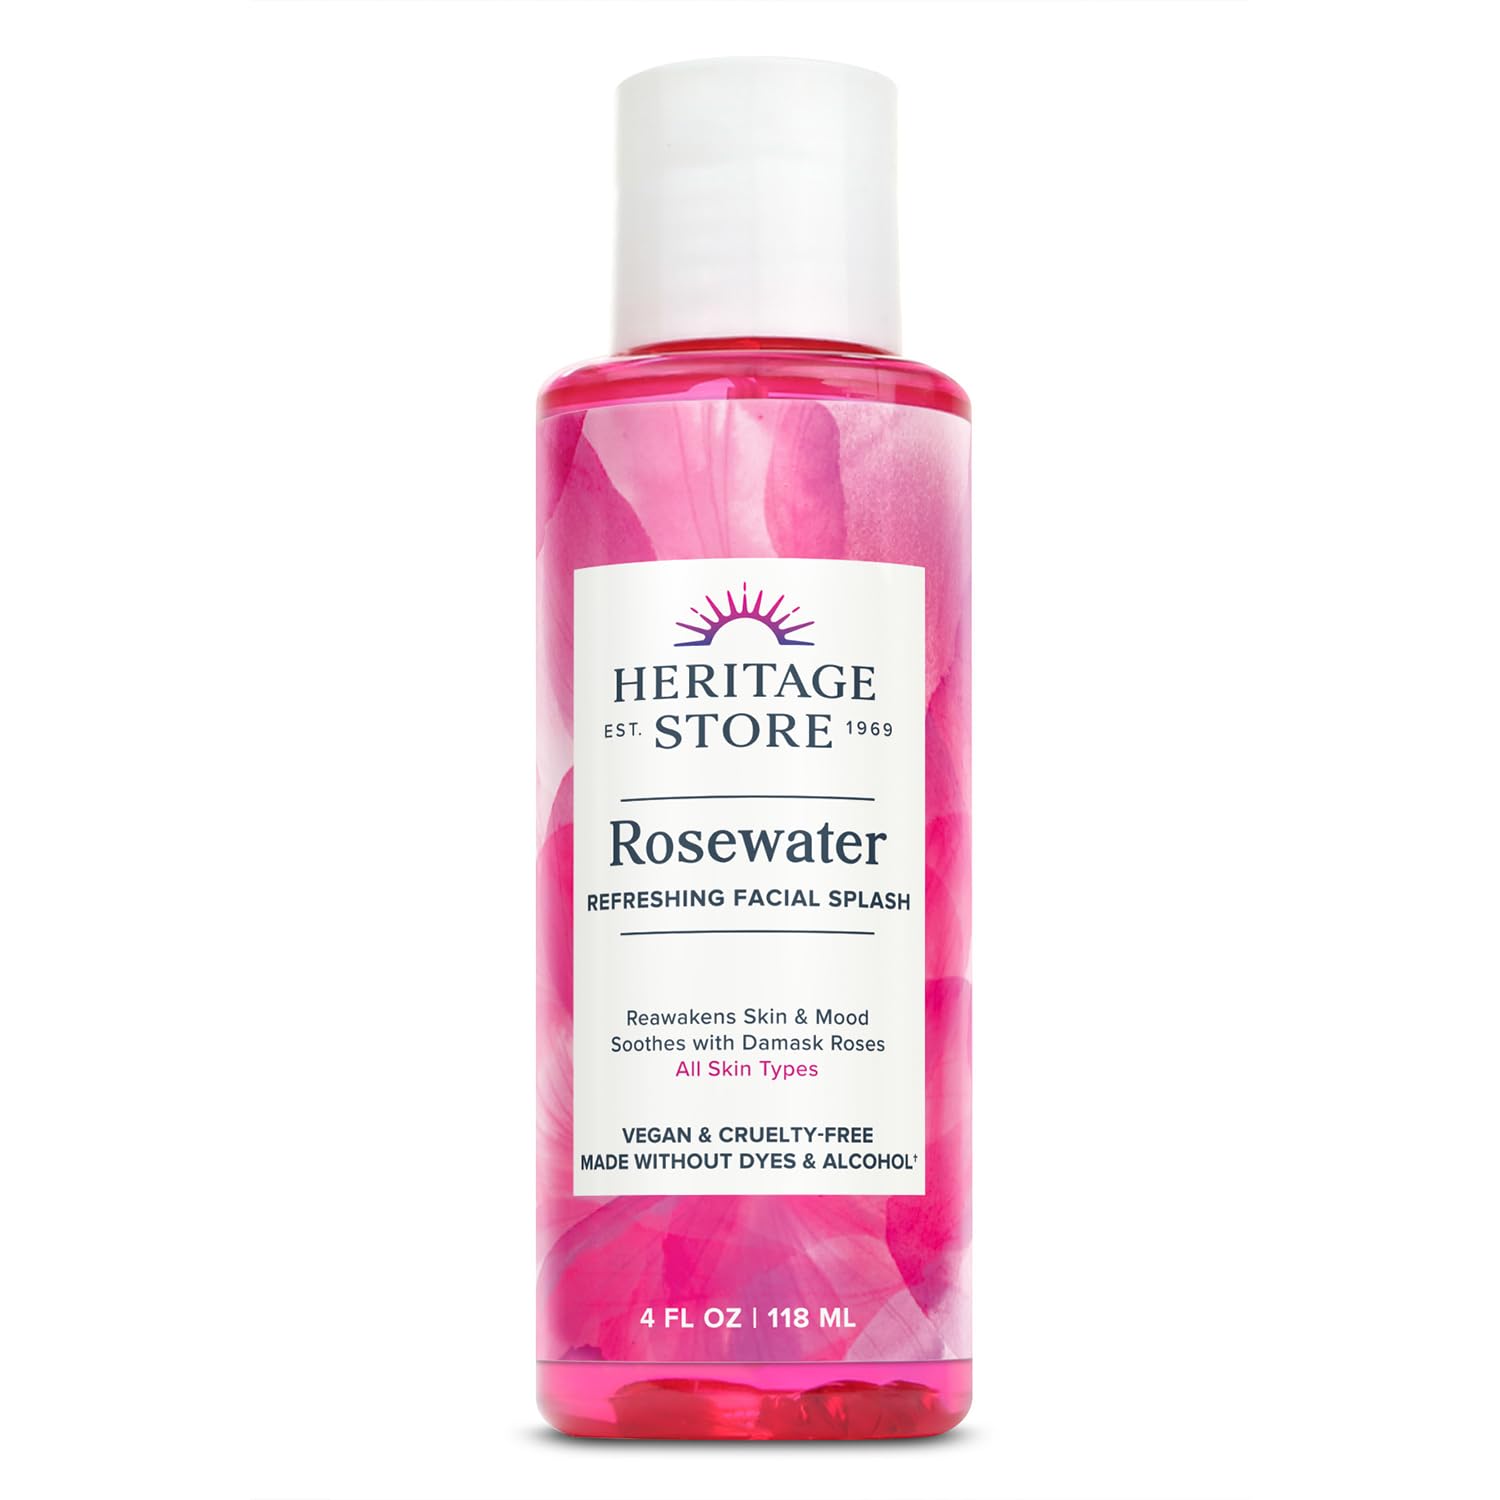 HERITAGE STORE Rosewater, Hydrating Formula for Skin & Hair, No Dyes or Alcohol, Vegan